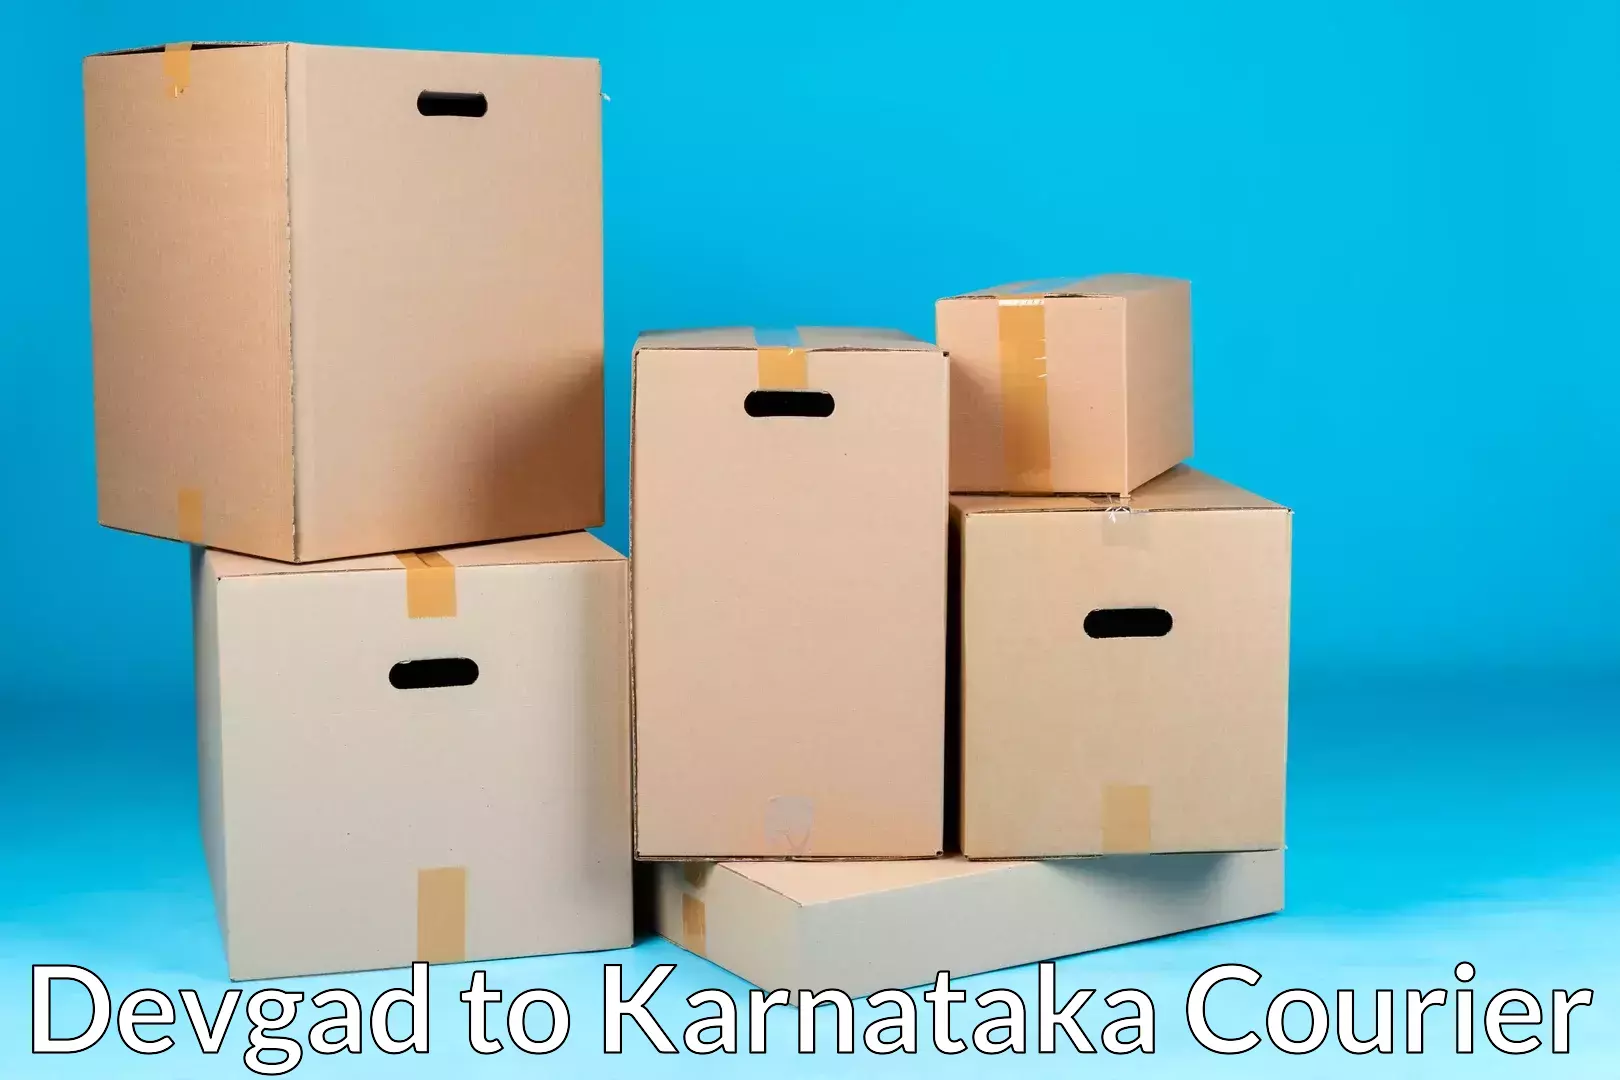 Full-service movers Devgad to Bhatkal